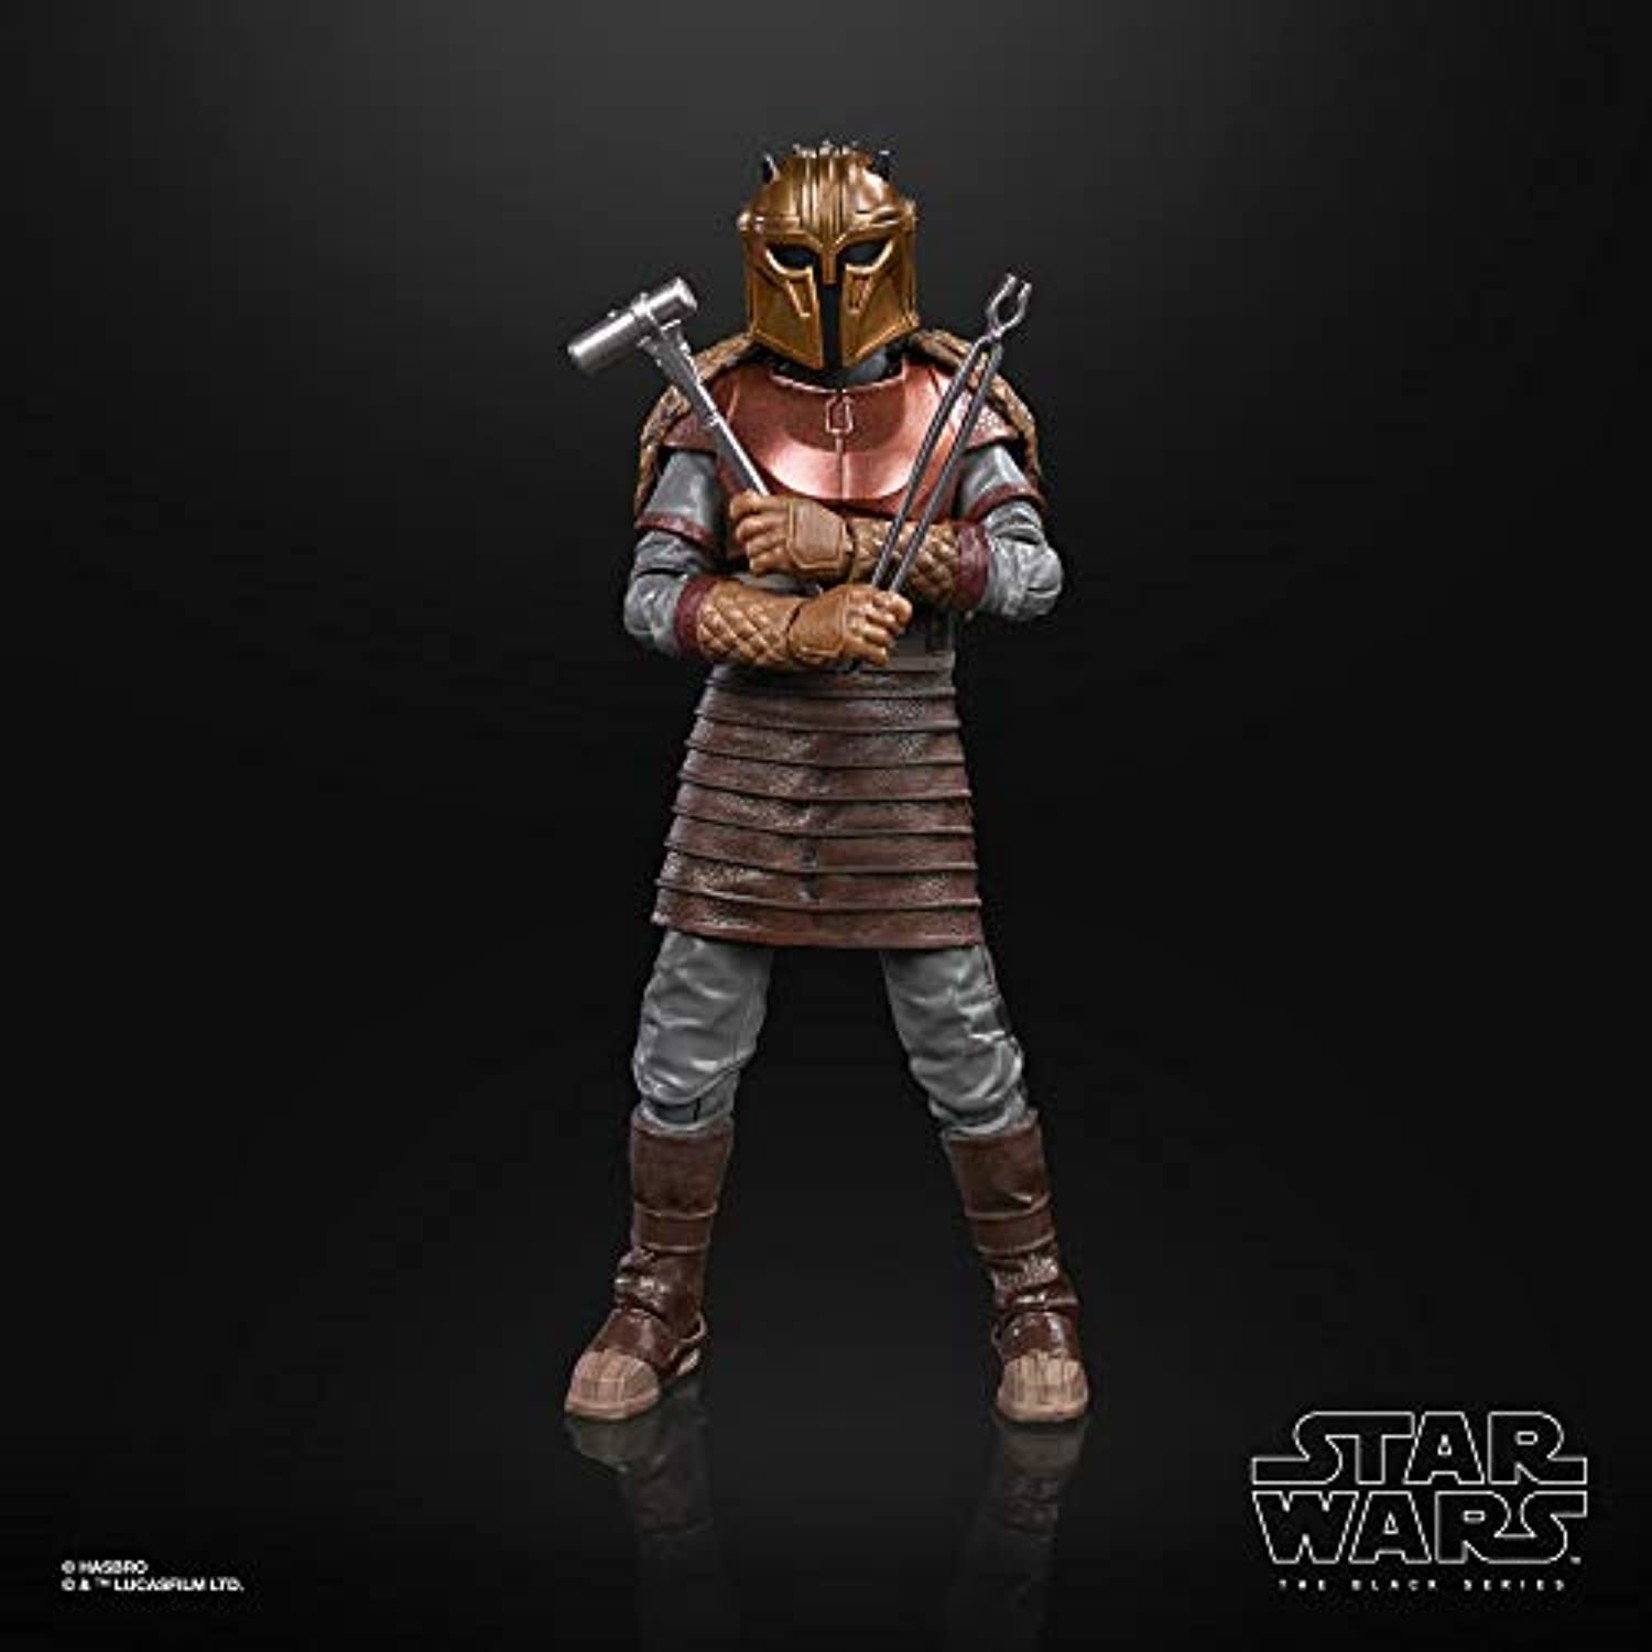 Star Wars The Black Series Star Wars The Black Series The Armorer